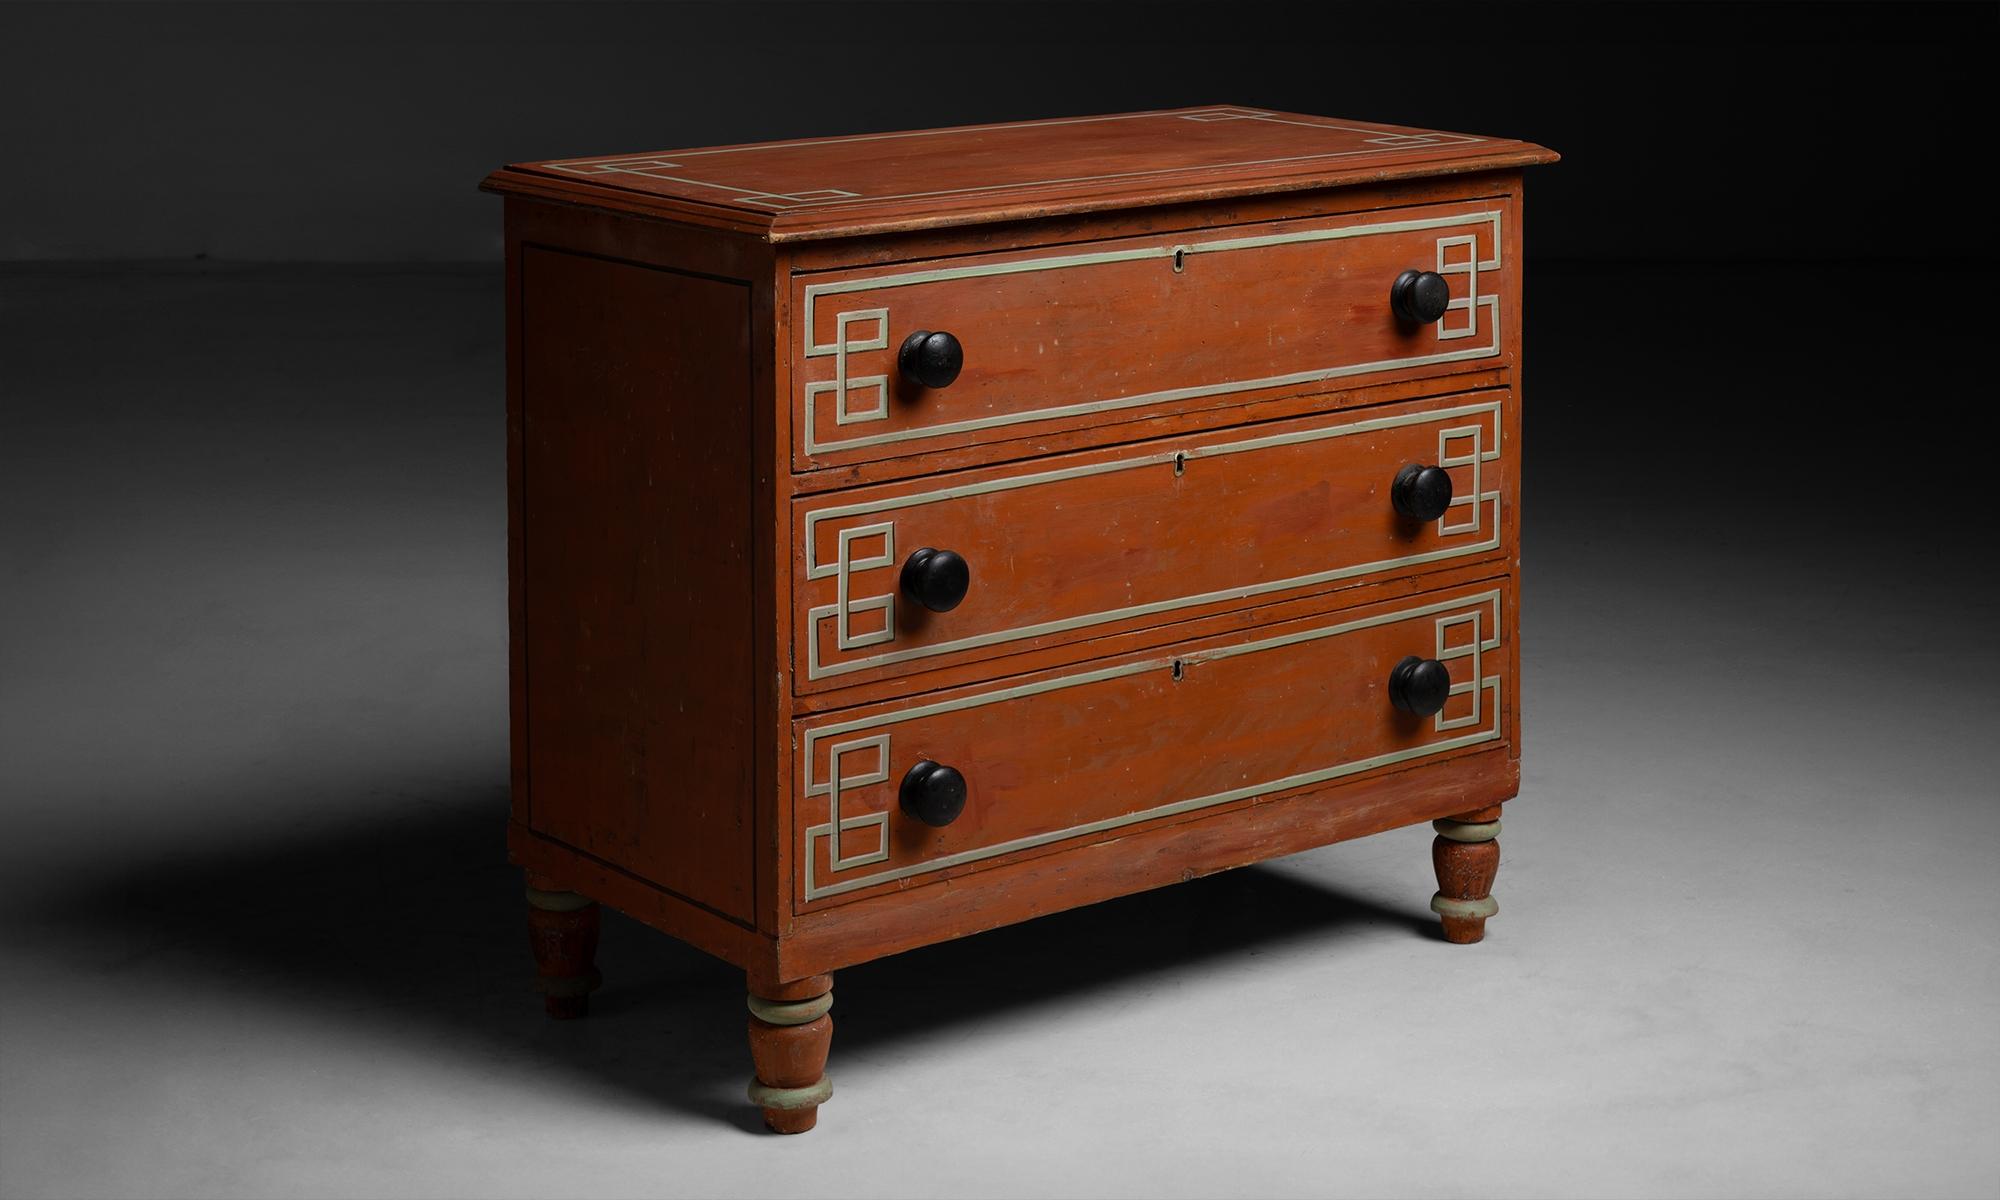 Painted Chest of Drawers
England circa 1890
Original paint with later decoration.
38”w x 19”d x 32.75”h